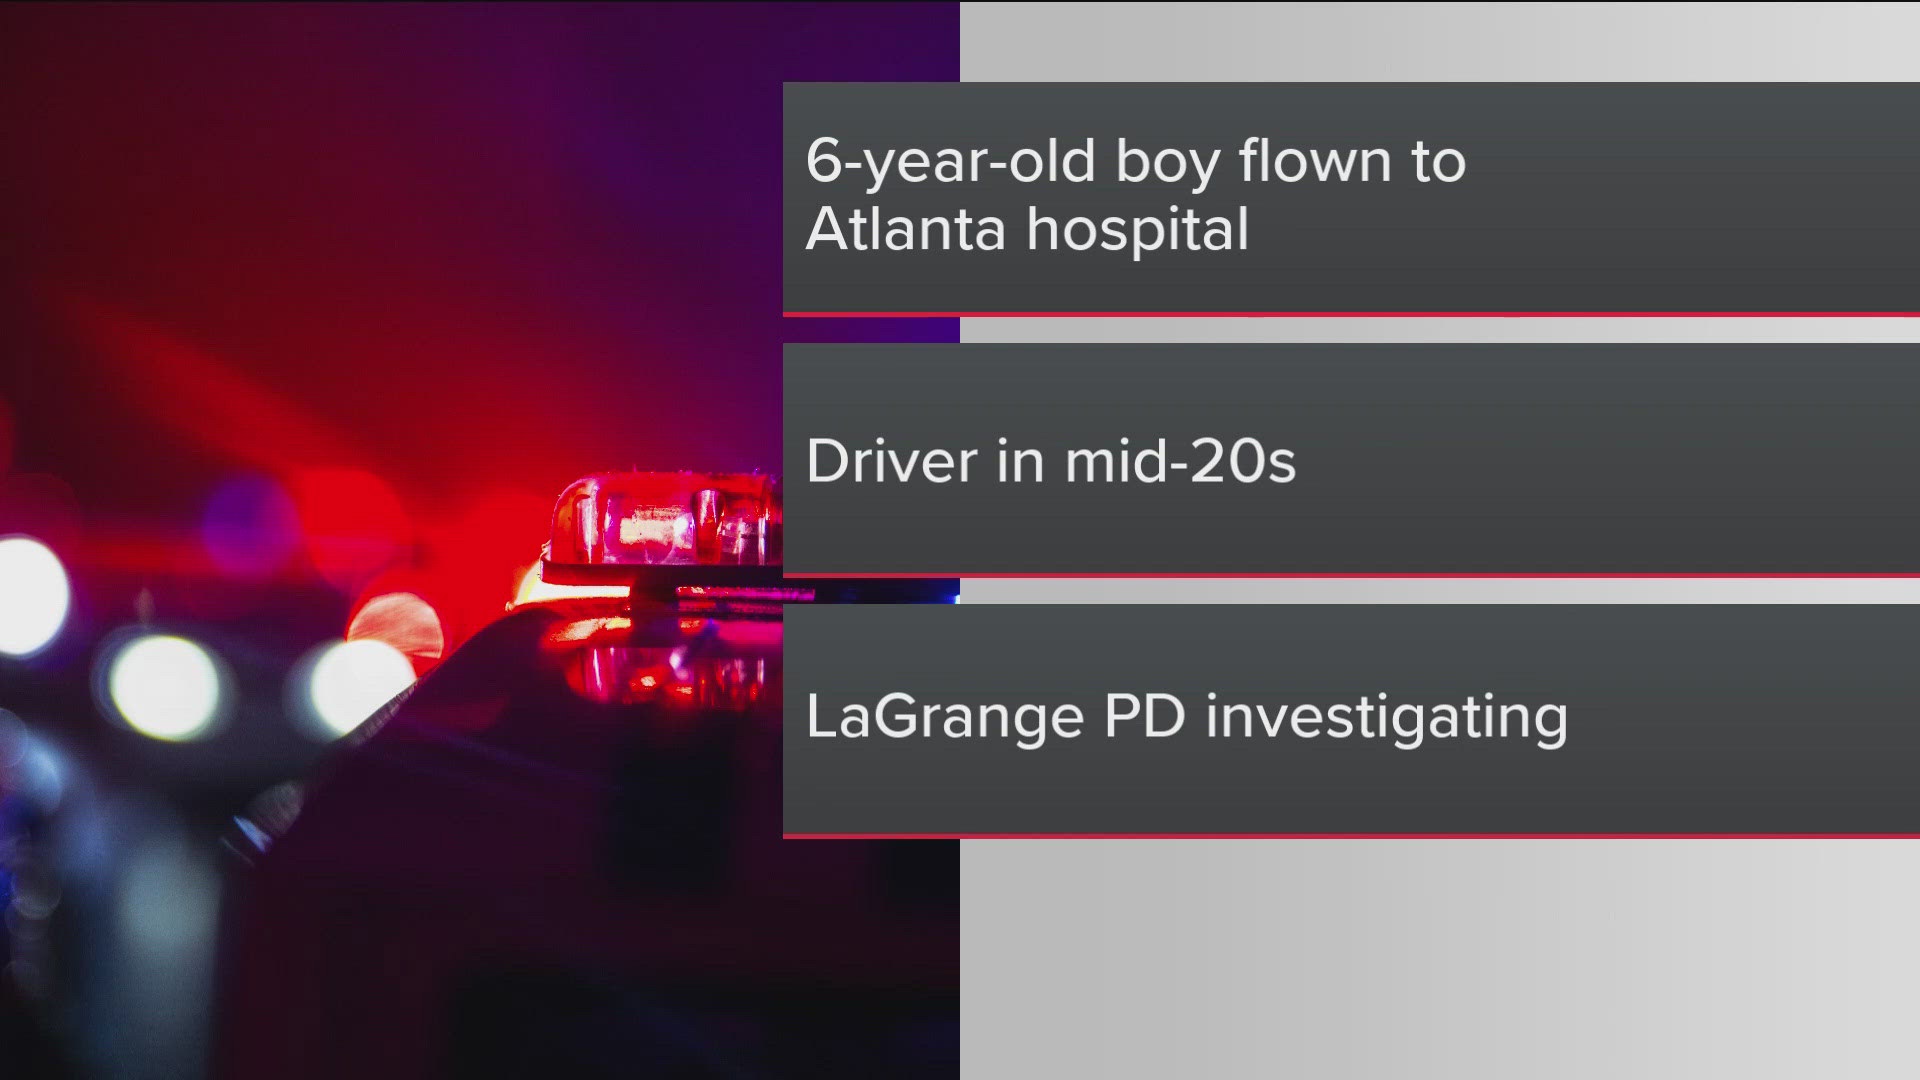 A 6-year-old boy from LaGrange is in the hospital after being hit by a car last night.